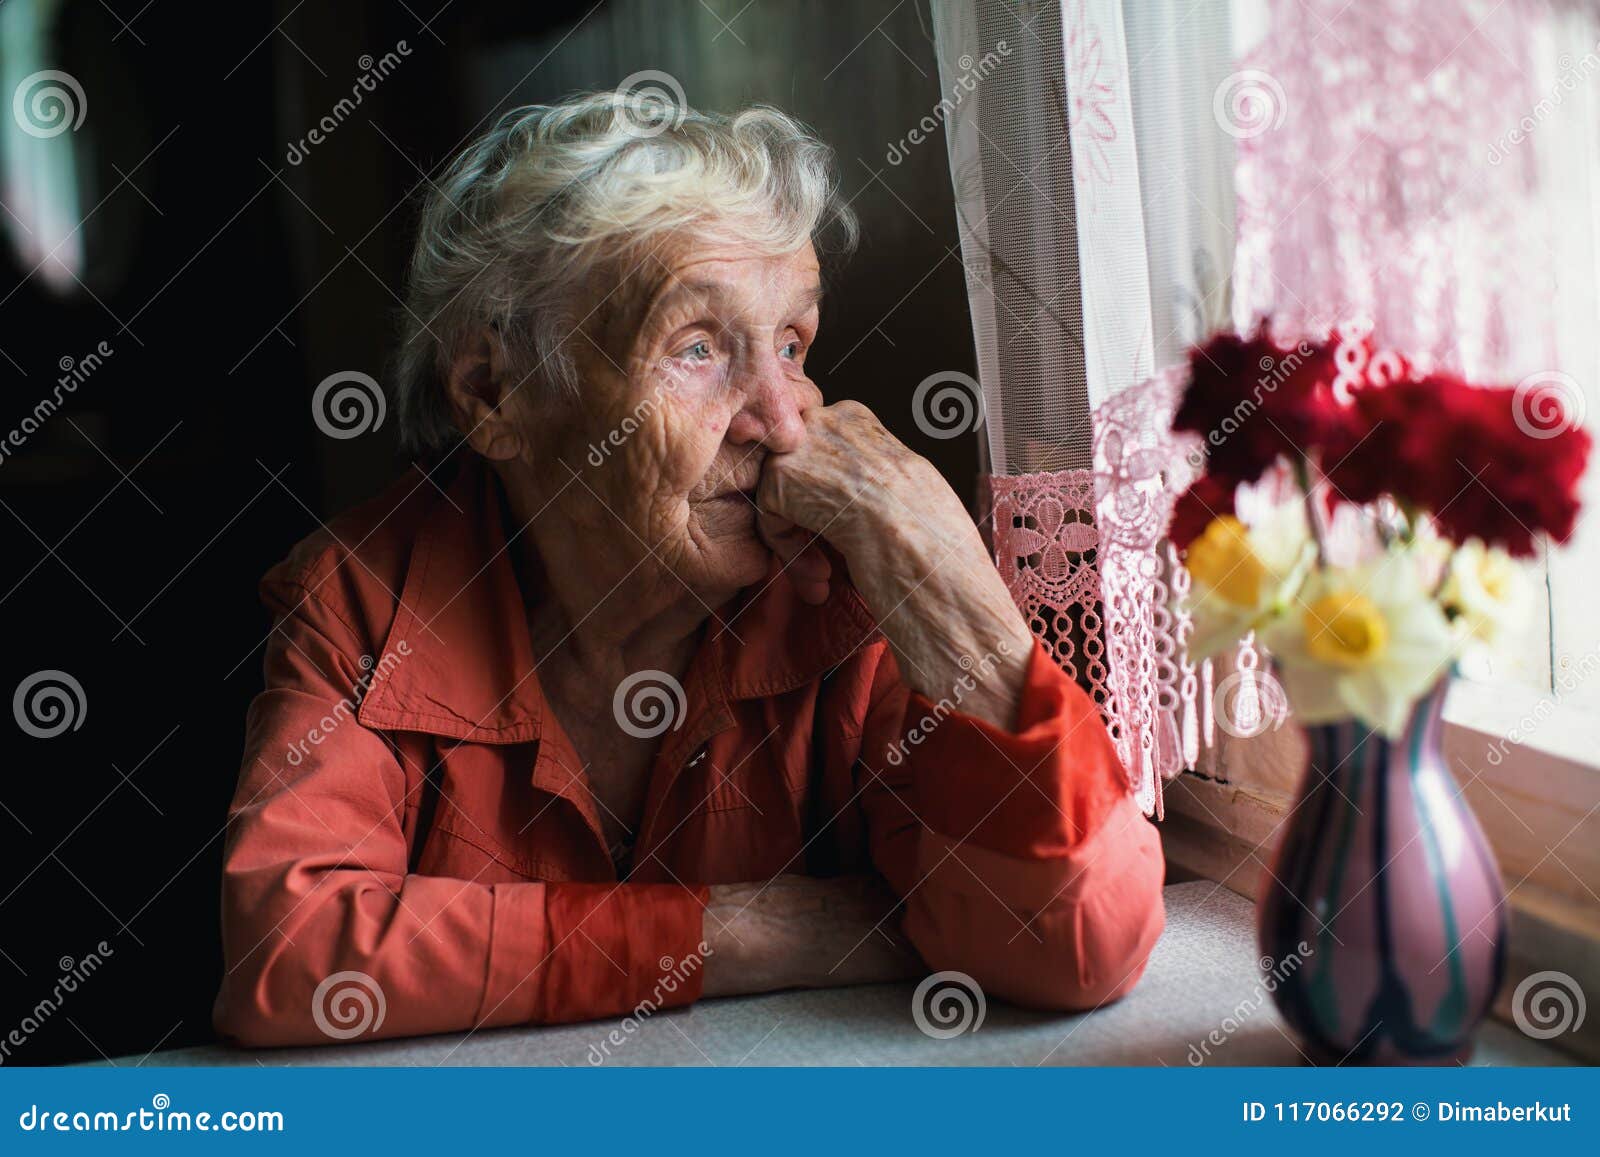 elderly lone woman looks sadly out the window.